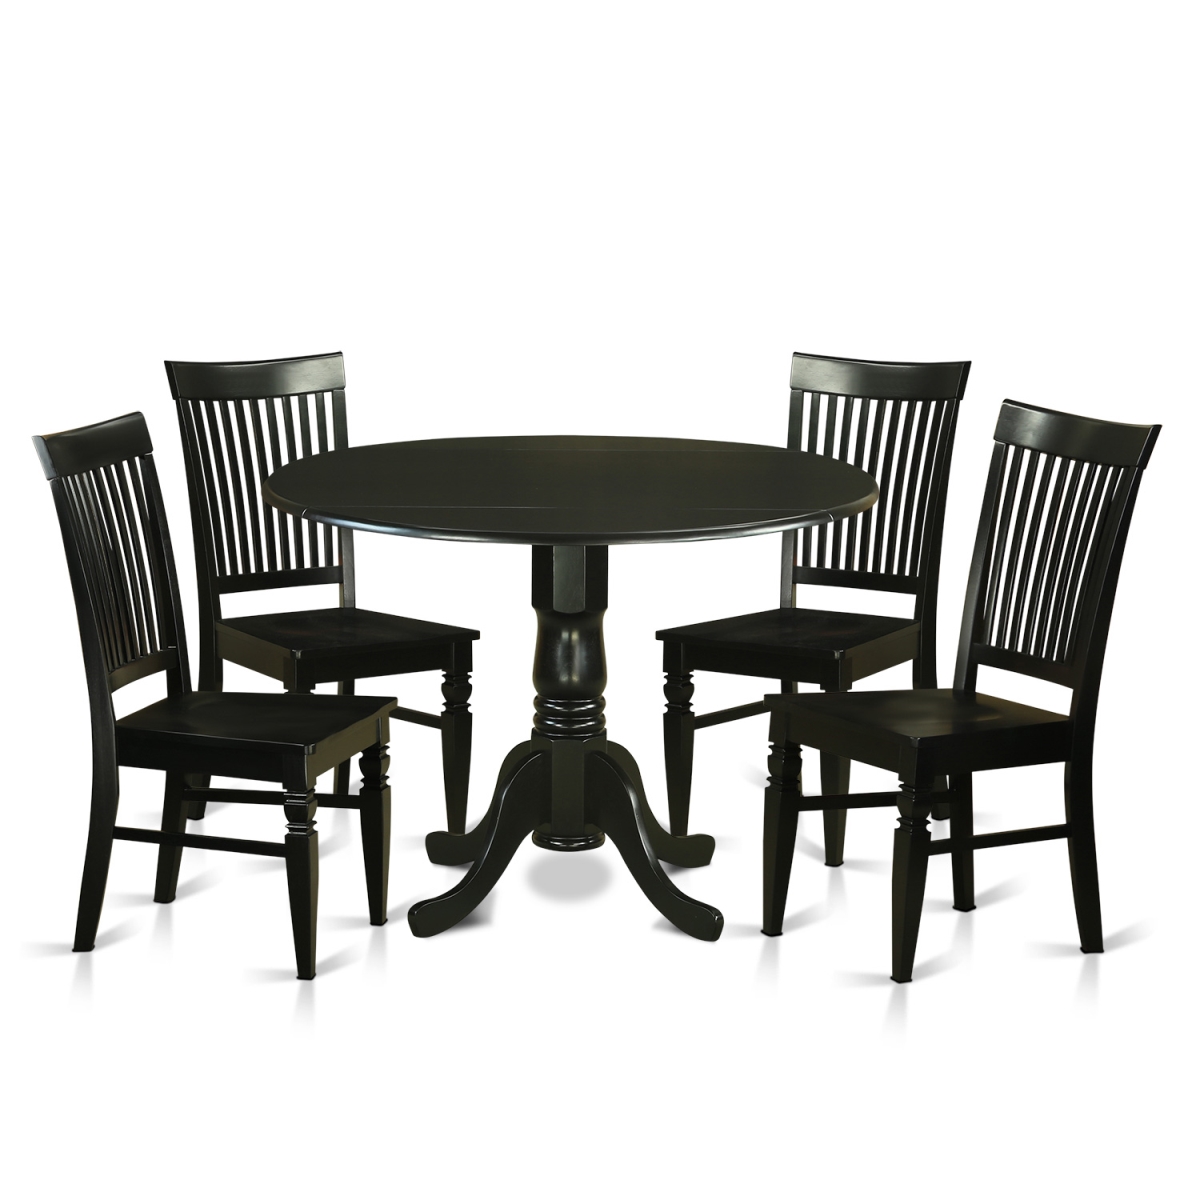 Picture of East West Furniture DLWE5-BLK-W Wood Seat Small Kitchen Table Set - Table & 4 Chairs, Black - 5 Piece